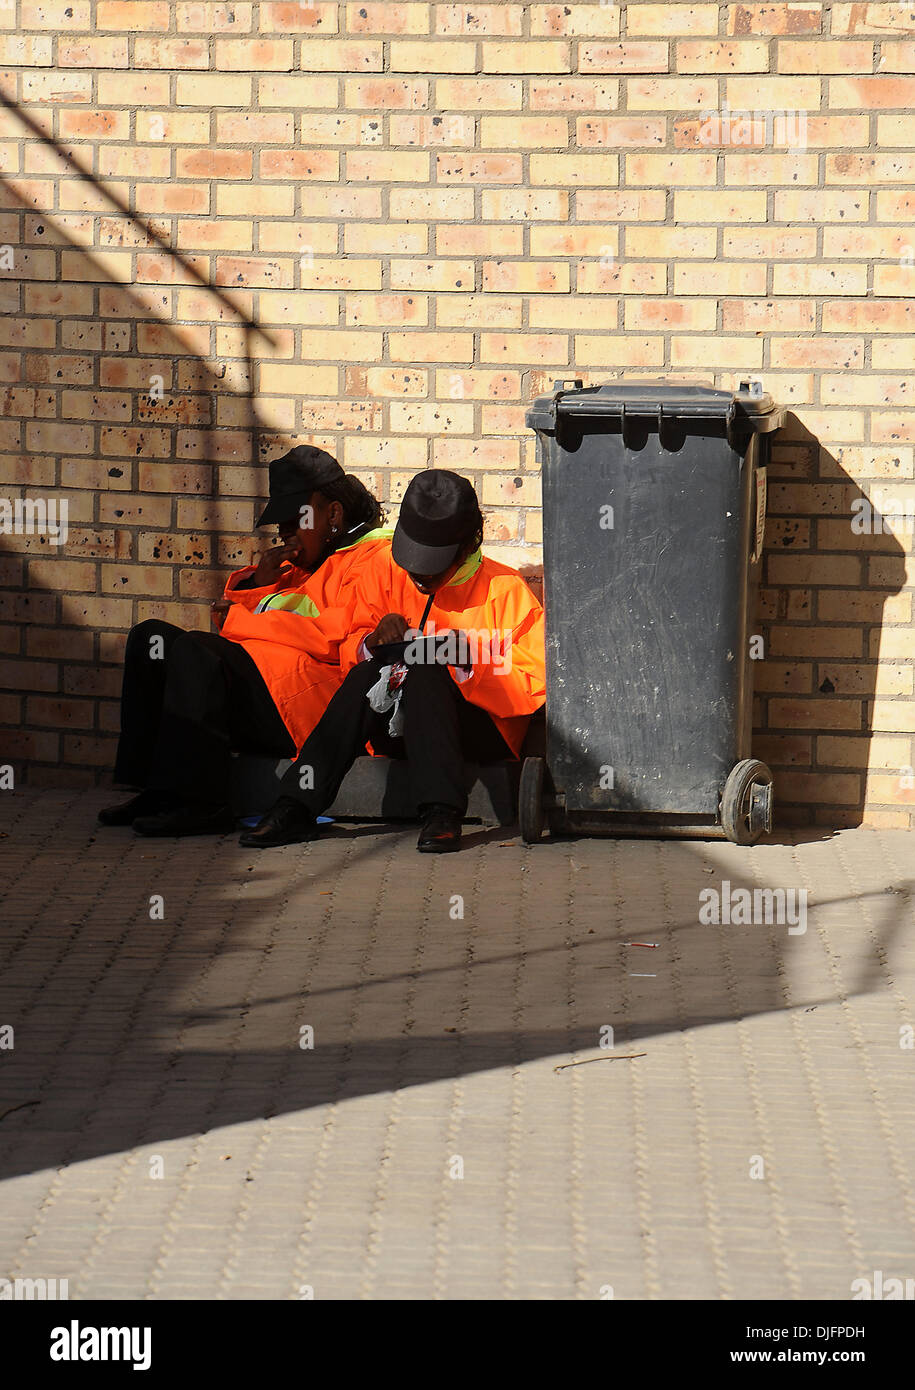 June 20, 2010 - Nelspruit, South Africa - Stewards eat before the FIFA World Cup 2010 soccer match between Italy and New Zealand at Mbombela Stadium on June 20, 2010 in Nelspruit, South Africa. (Credit Image: © Luca Ghidoni/ZUMApress.com) Stock Photo